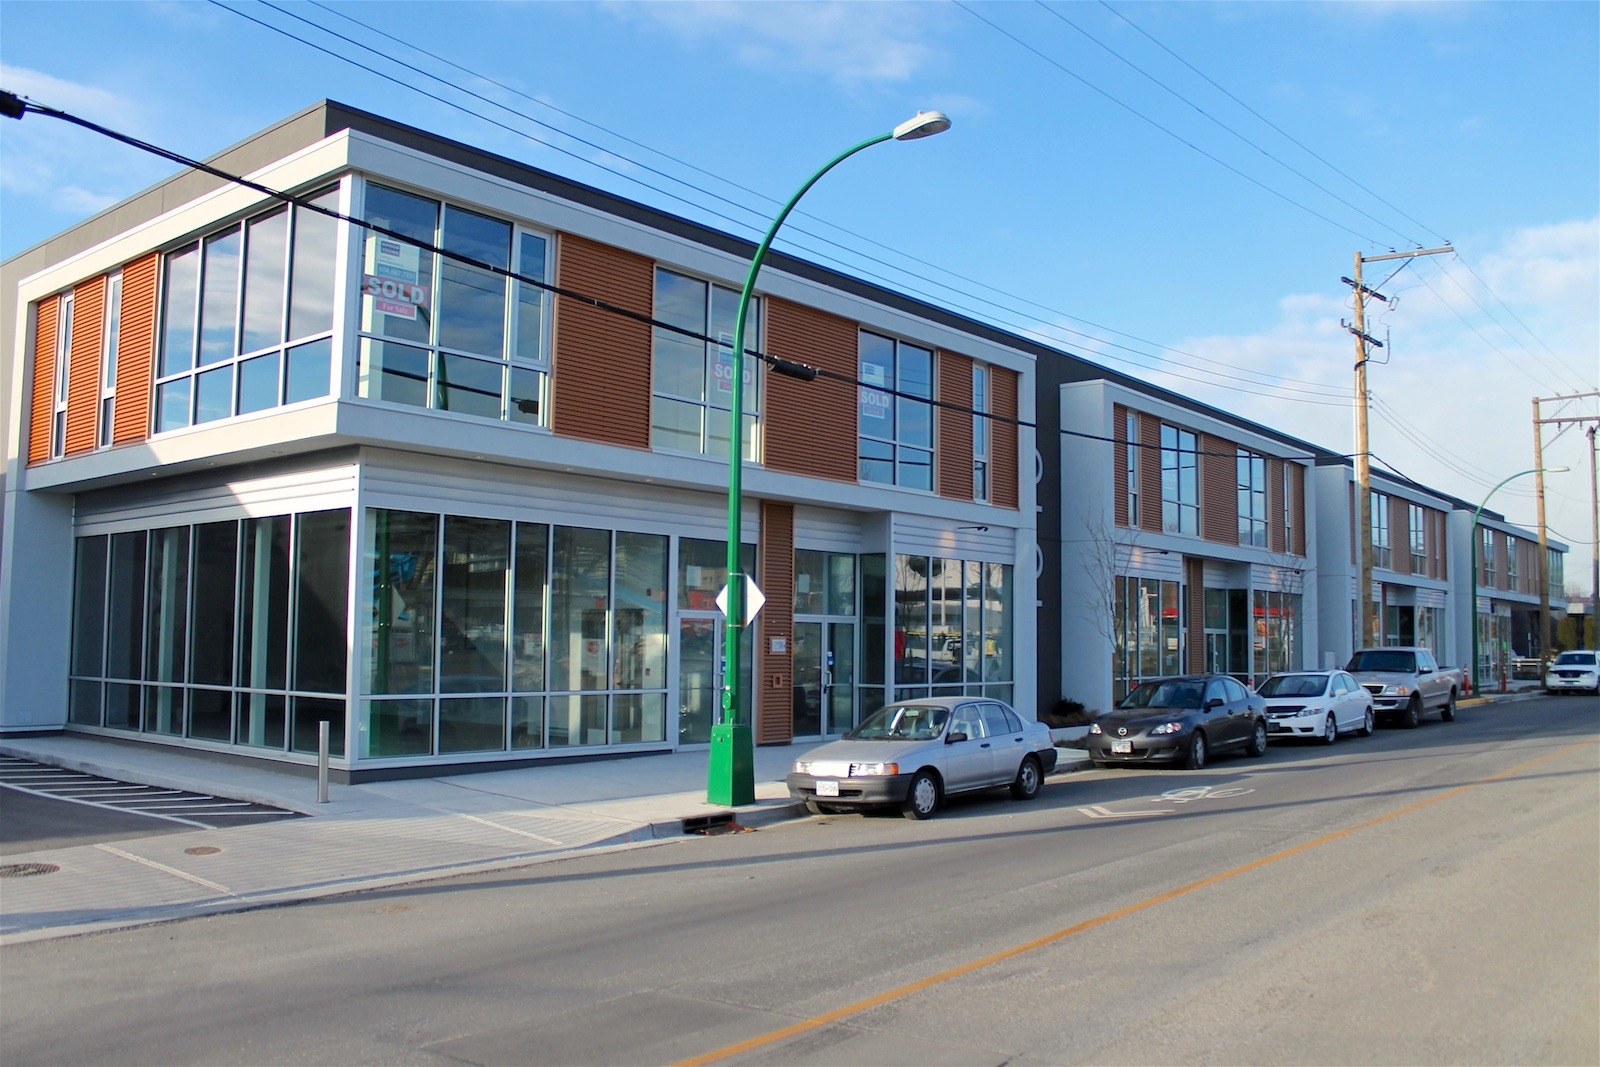 Commercial Buildings: 1515 Barrow
Completed 2013